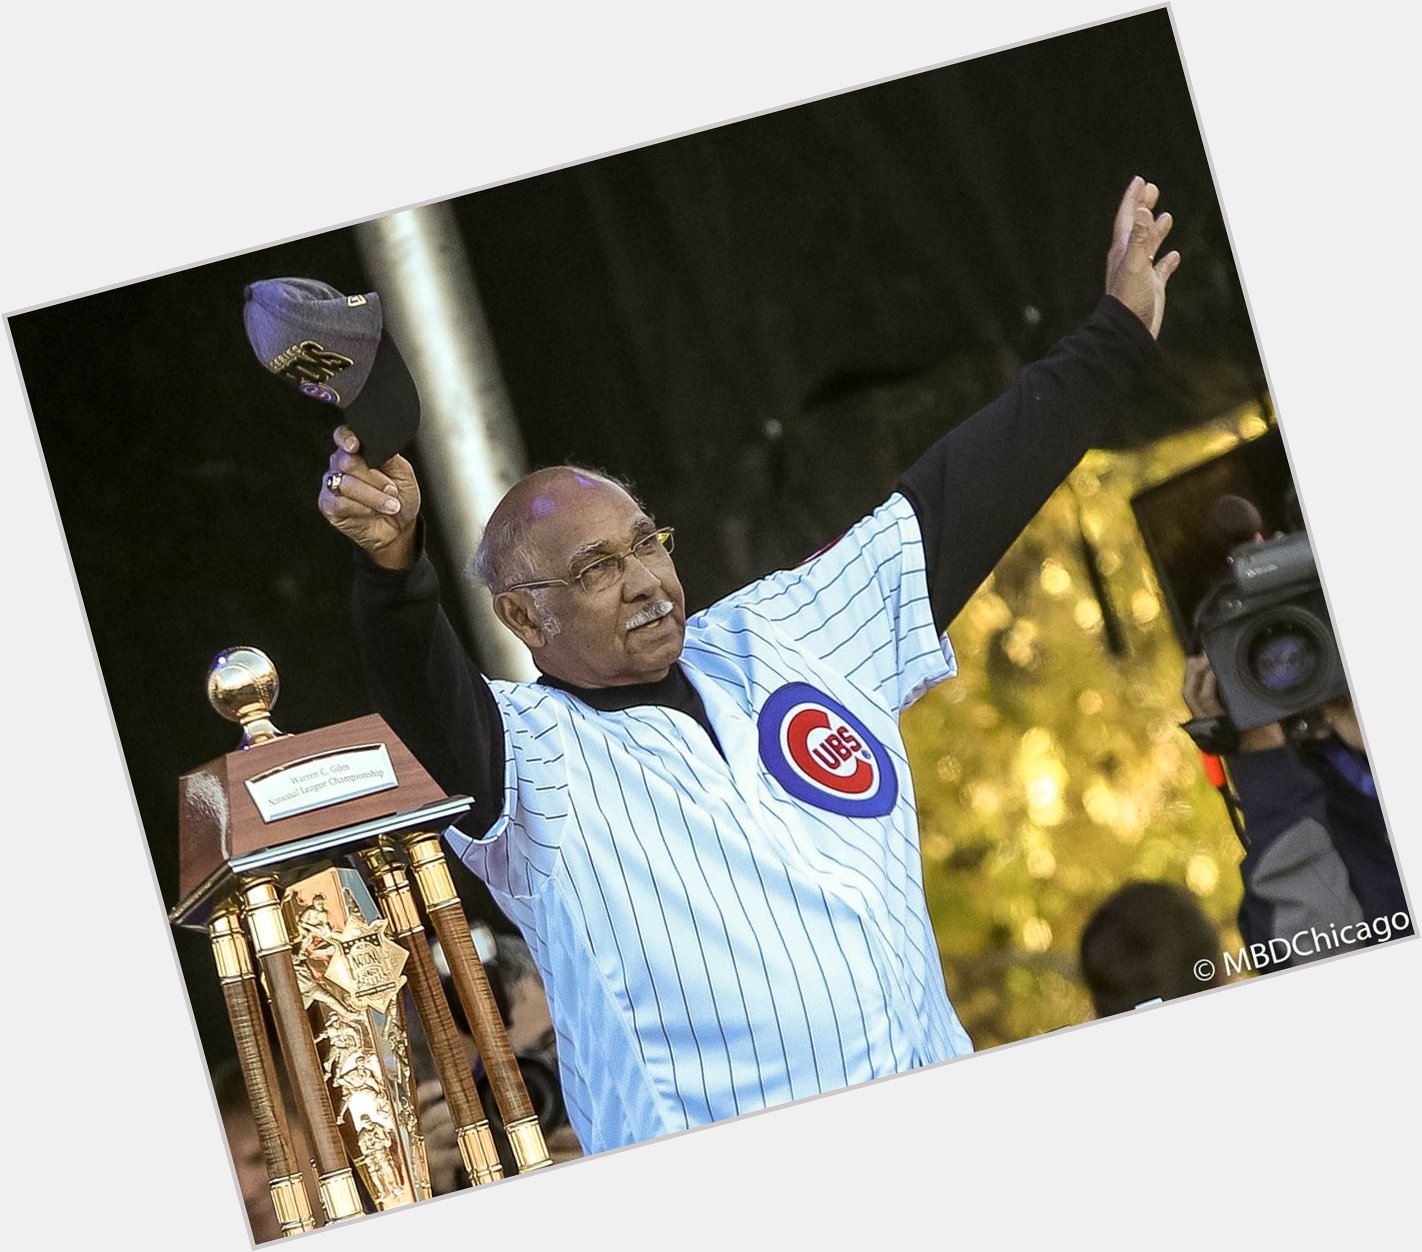 A belated Happy Birthday to Hall of Famer Billy Williams! 